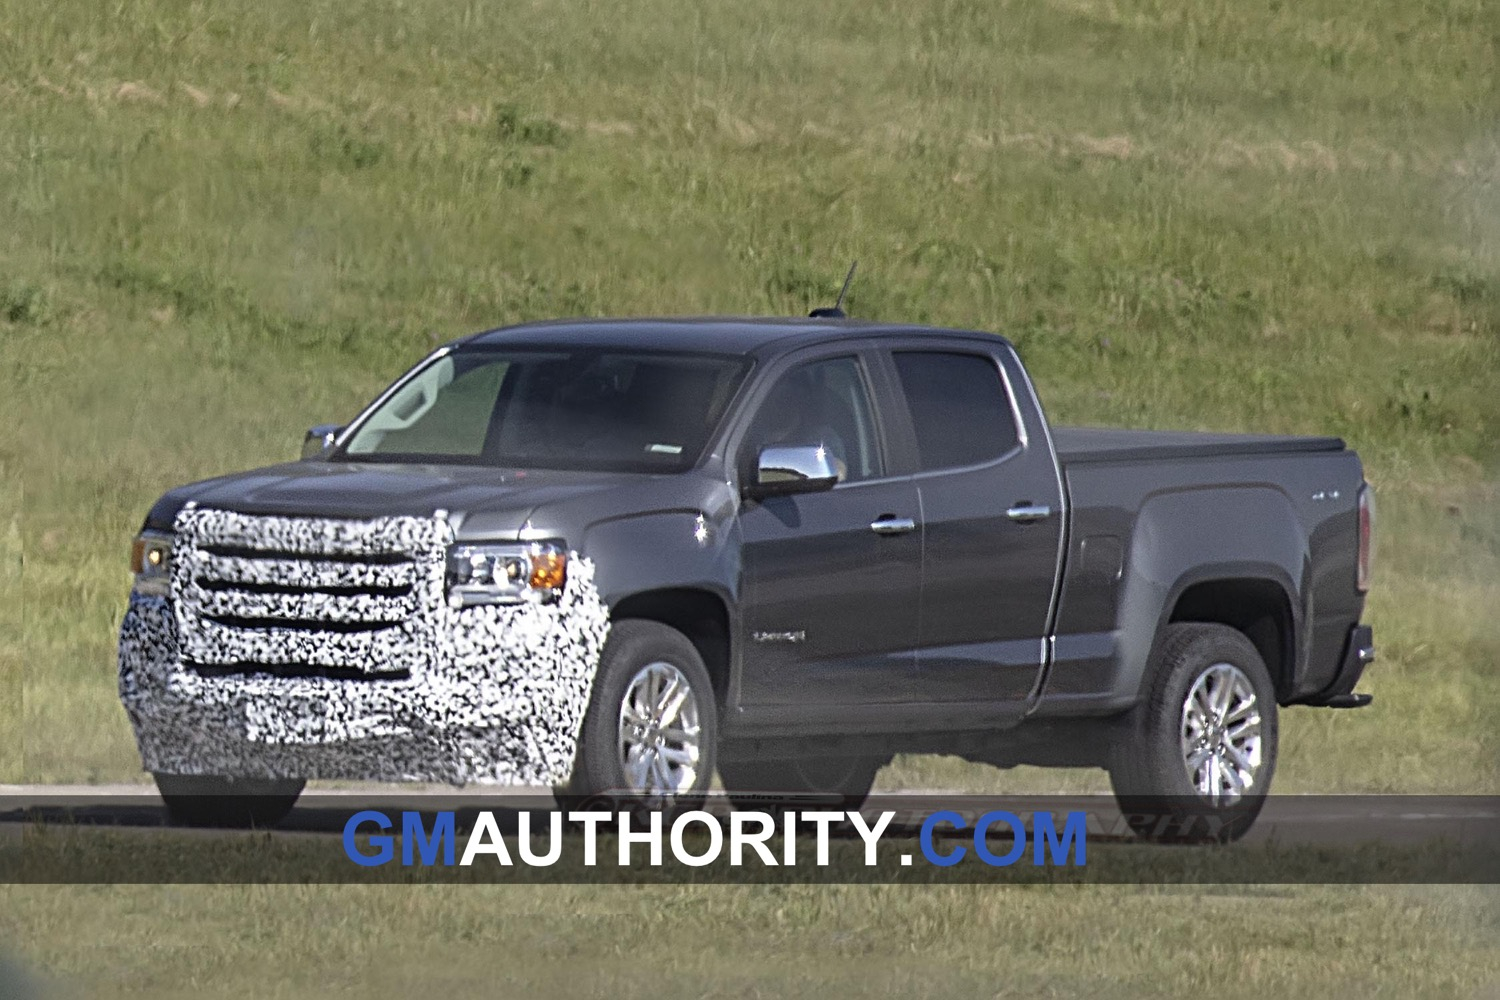 New 2022 Gmc Canyon Colors Diesel Updates Gmc Specs News